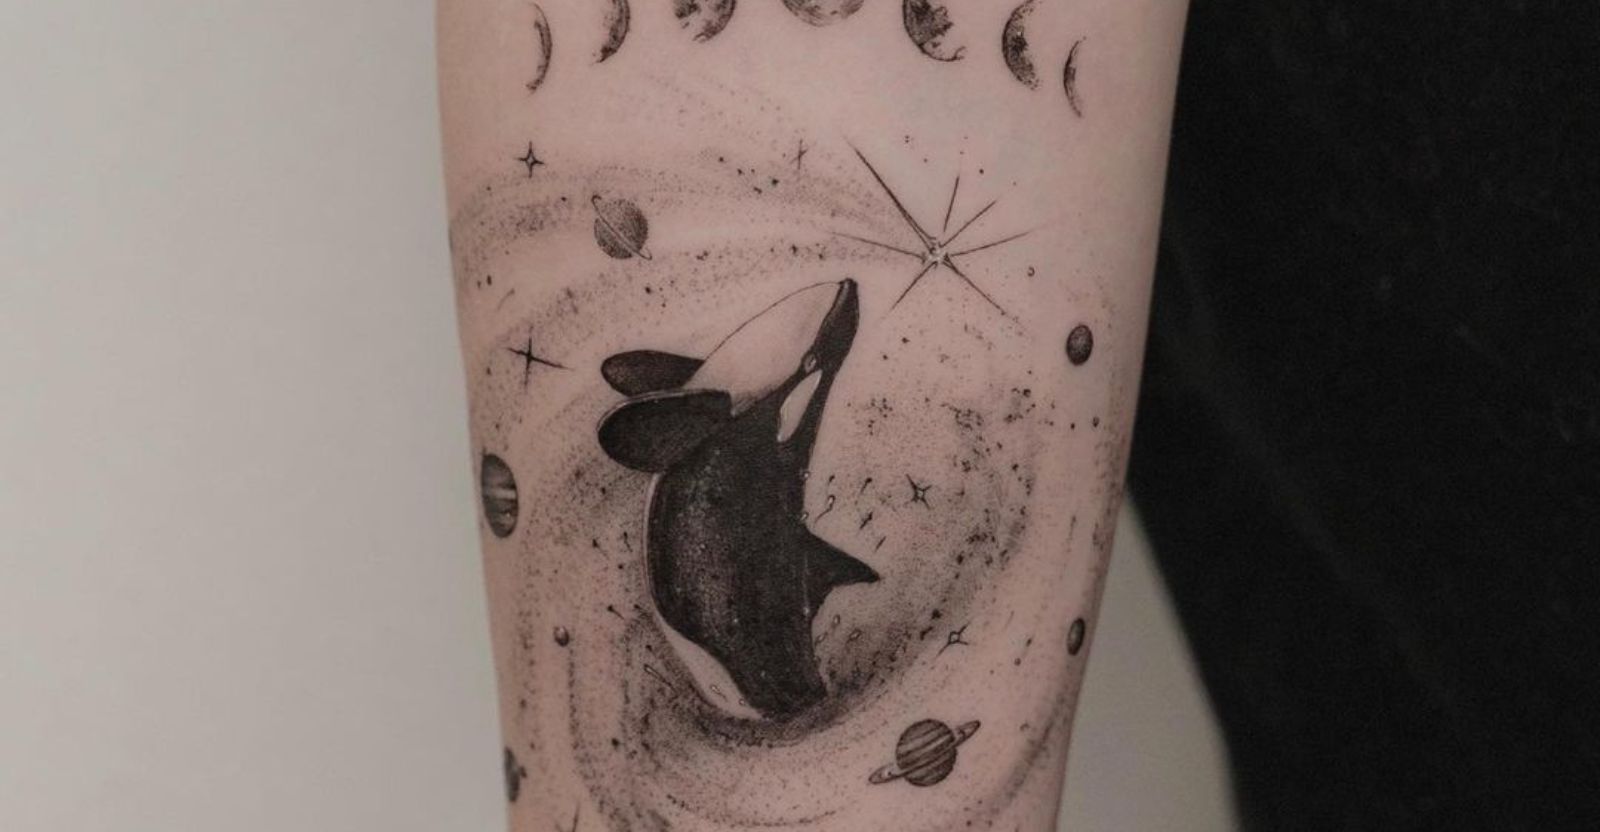 Astrological Tattoos: 4 of Our Favorite Designs | Mad Rabbit Tattoo